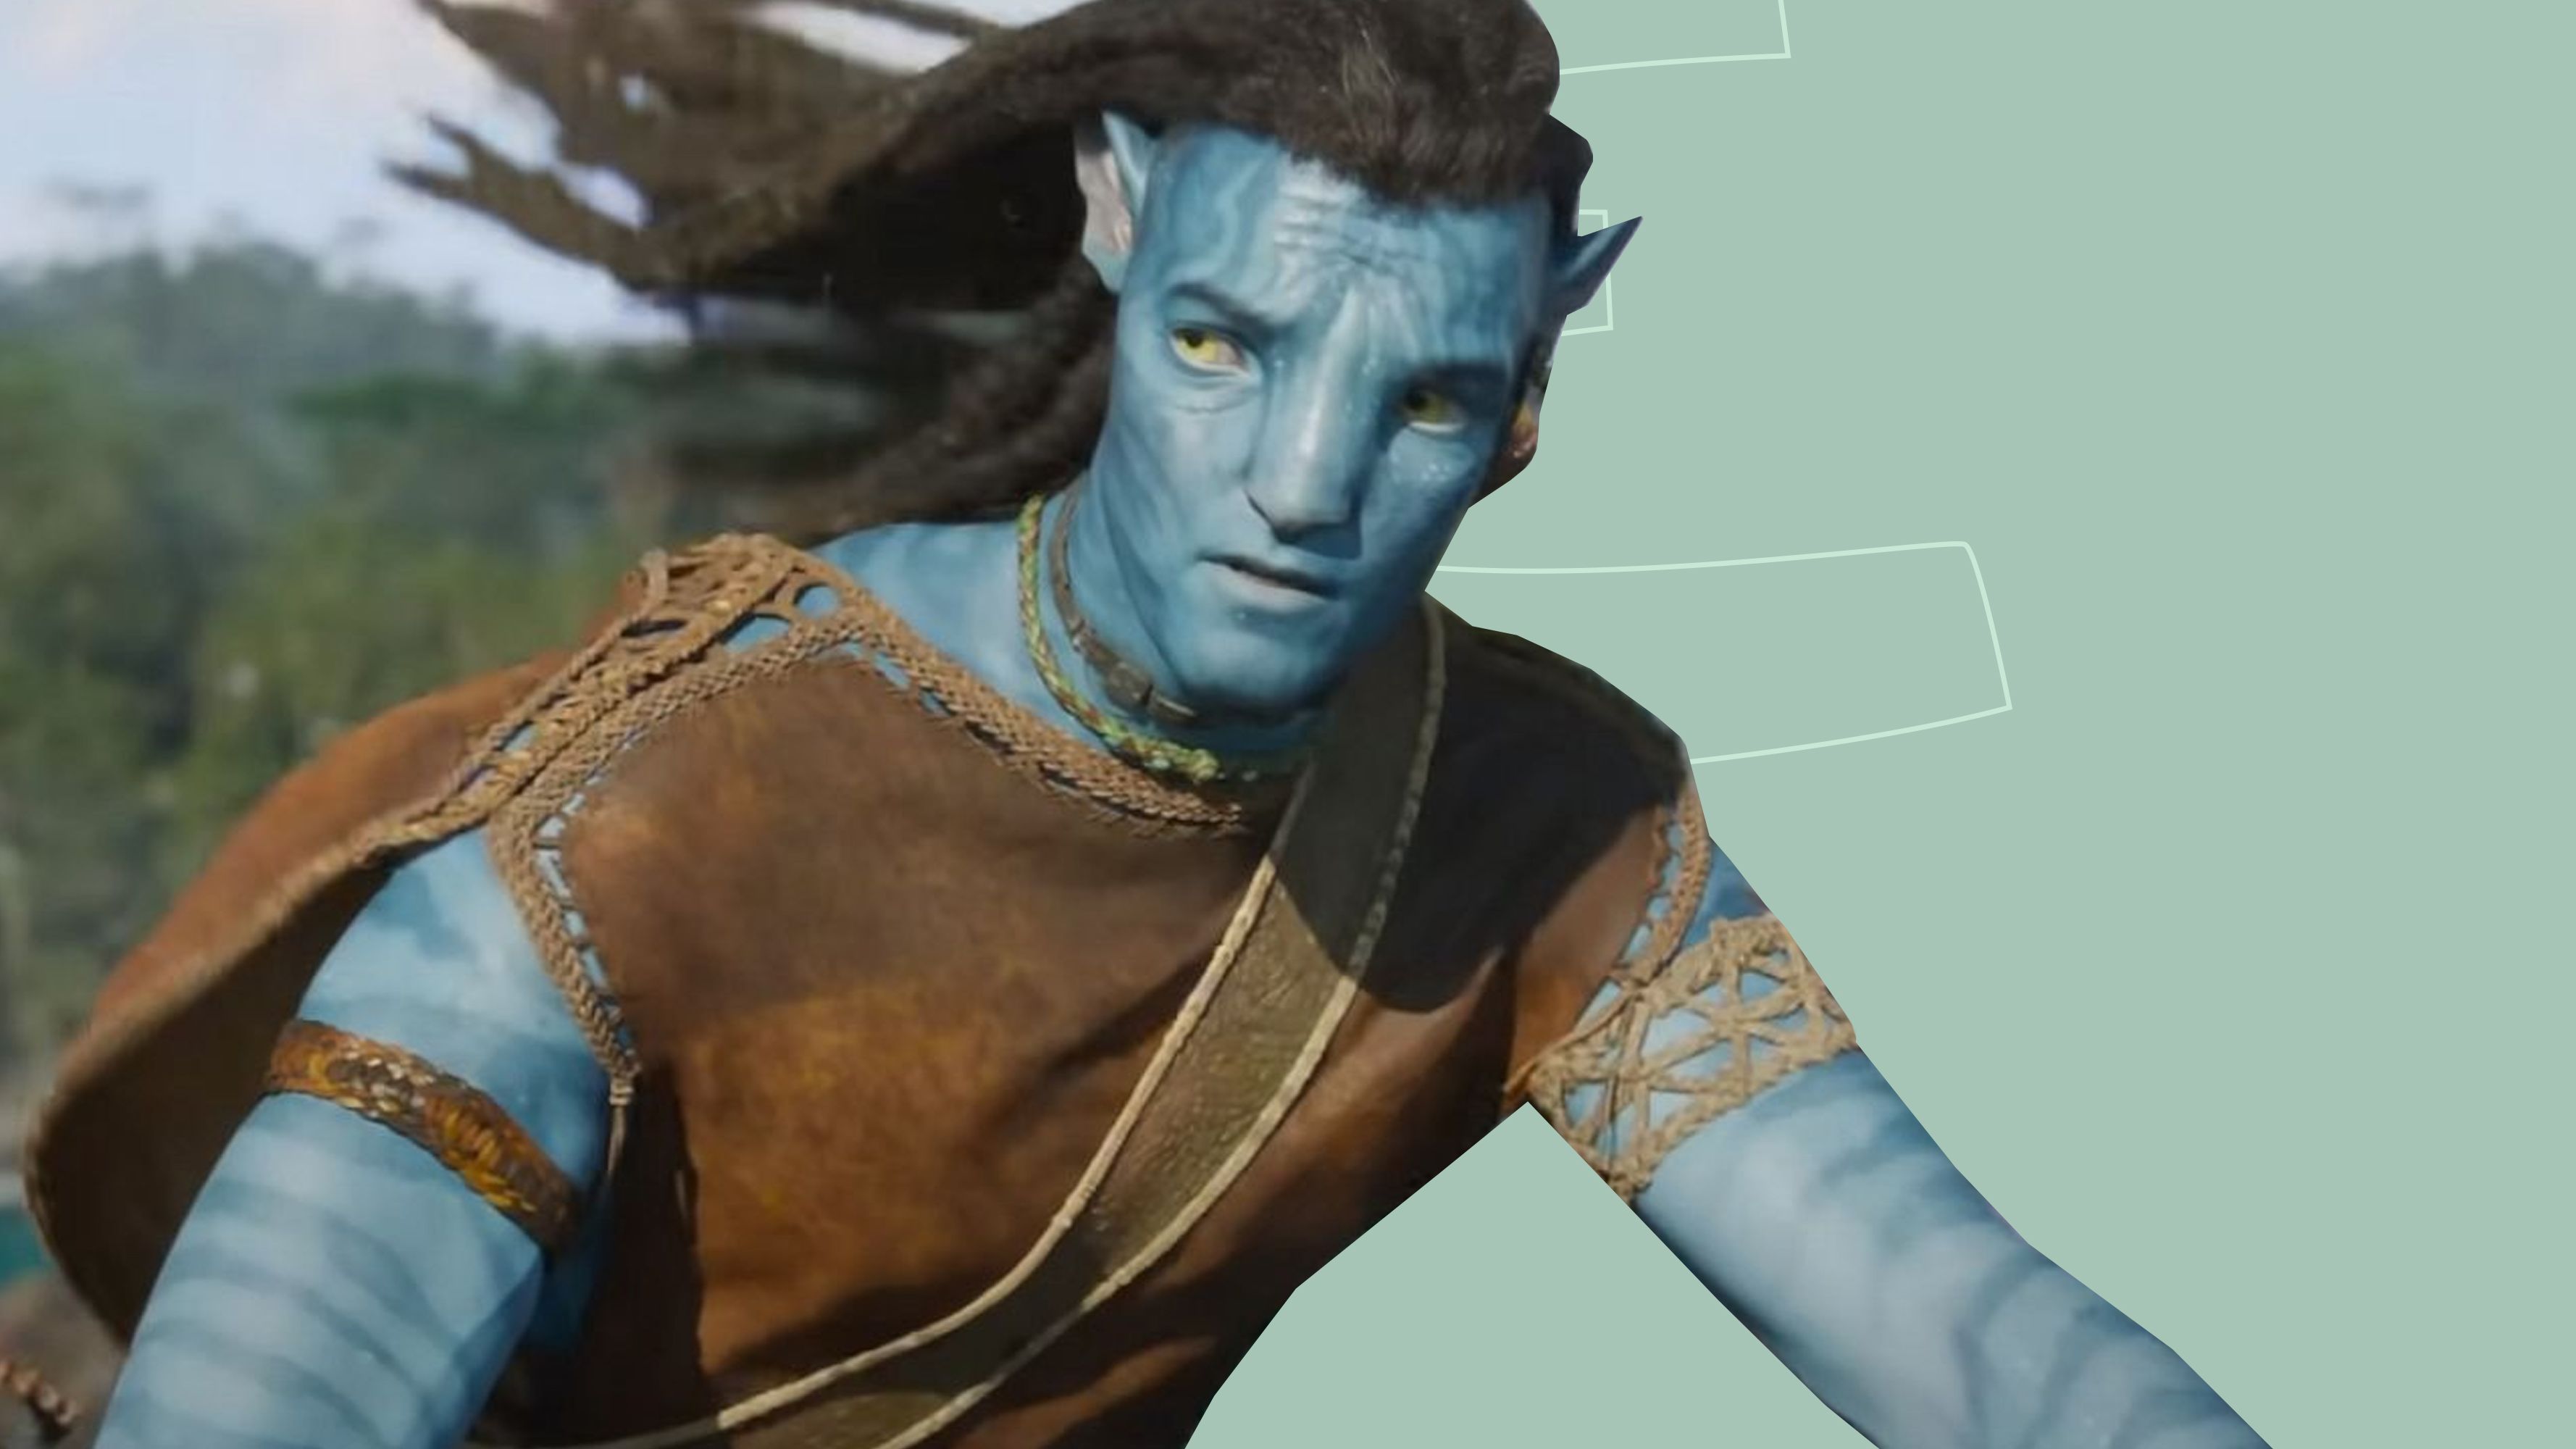 Need a Talking Avatar? Here Are 10 Options To Go With